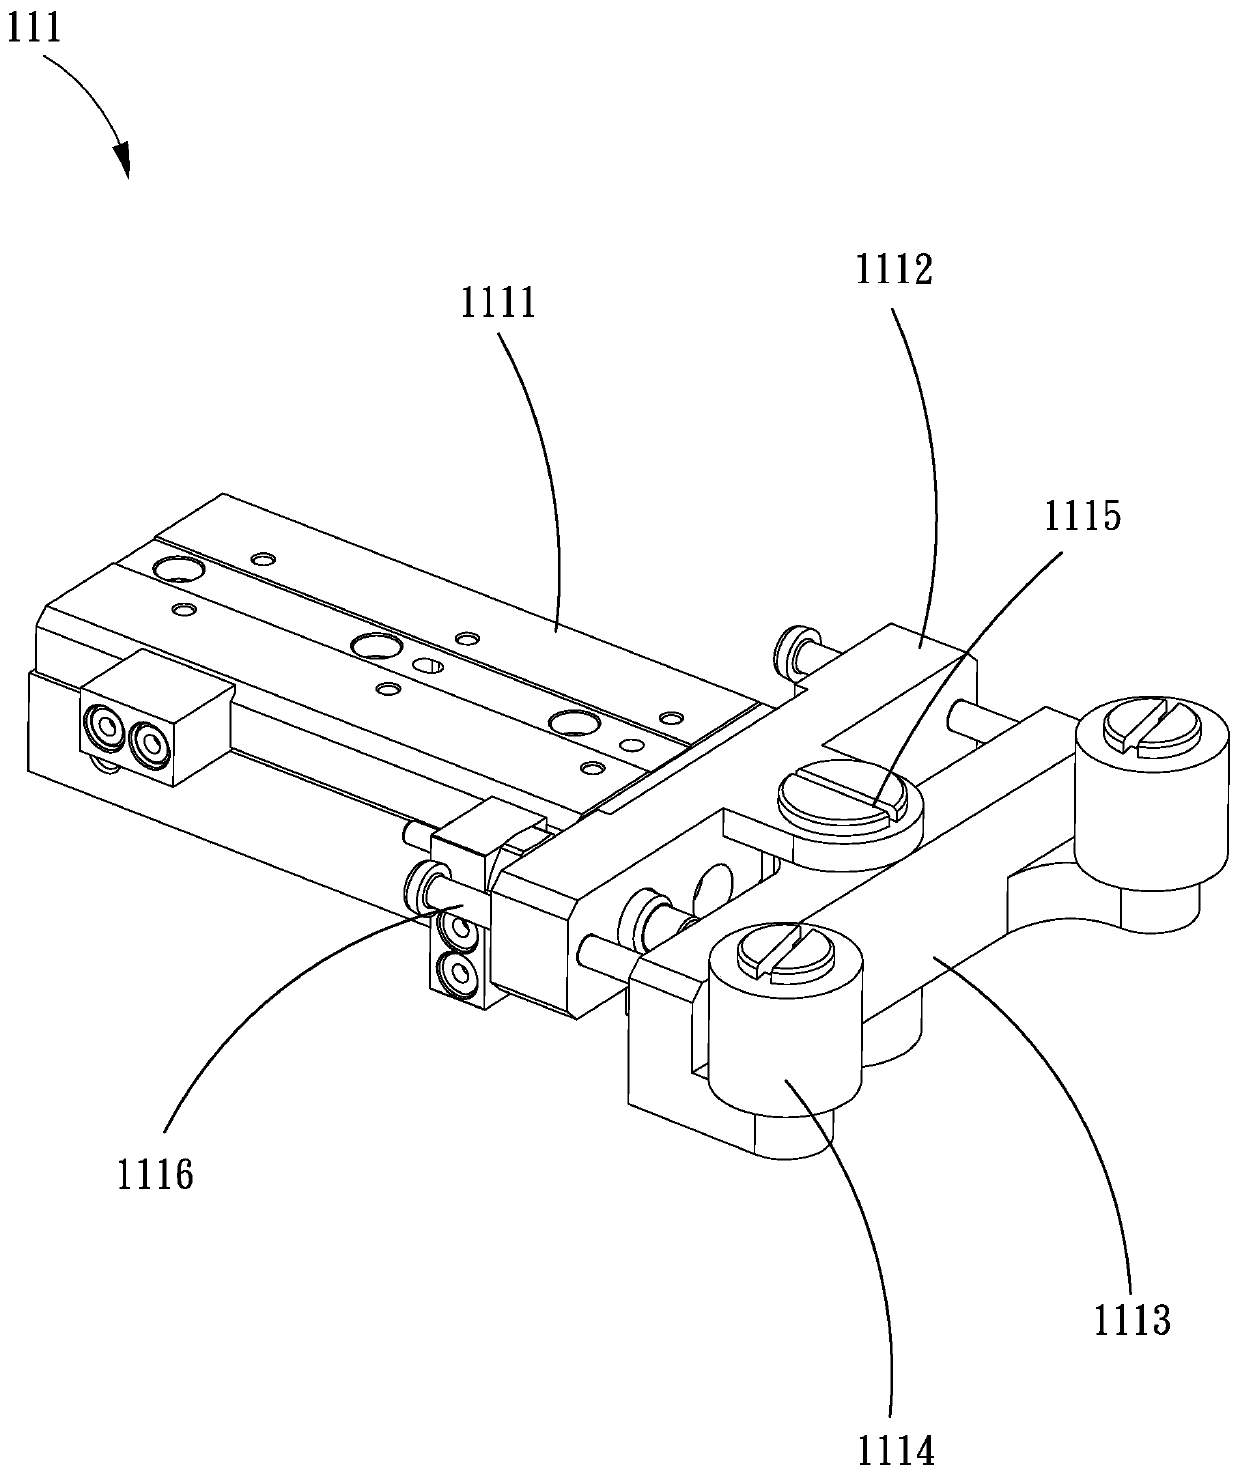 Sole clamping and positioning device